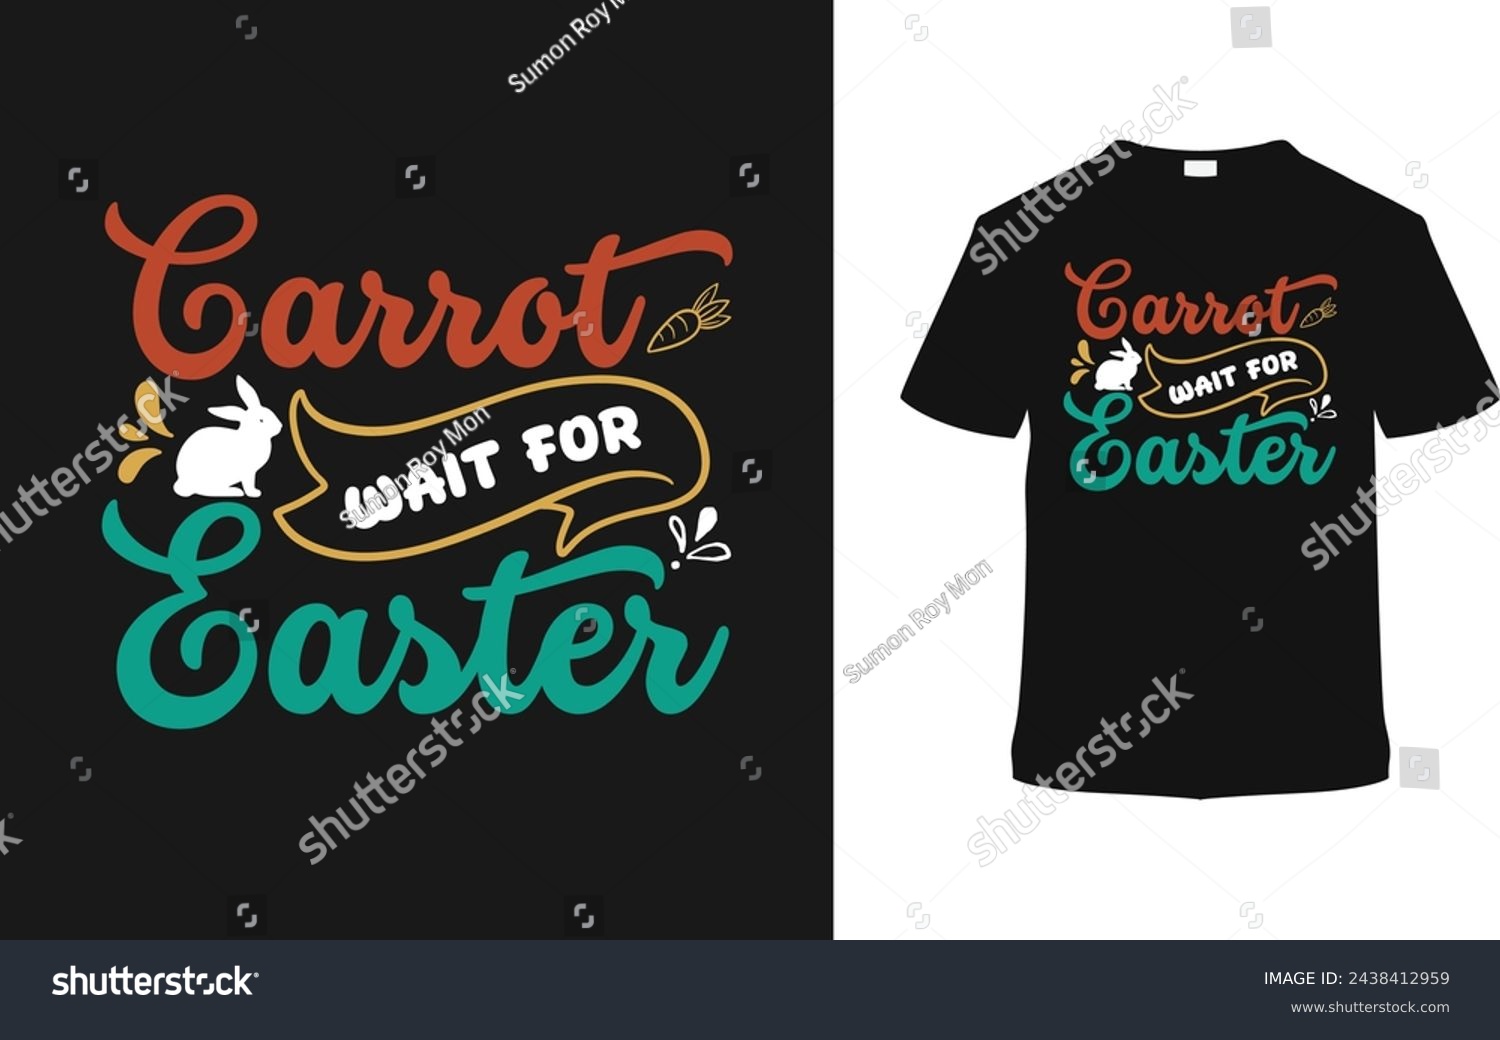 SVG of Carrot Wait For Easter Day T shirt Design, vector illustration, graphic template, print on demand, typography, vintage, eps 10, textile fabrics, retro style, element, apparel, easter tee svg